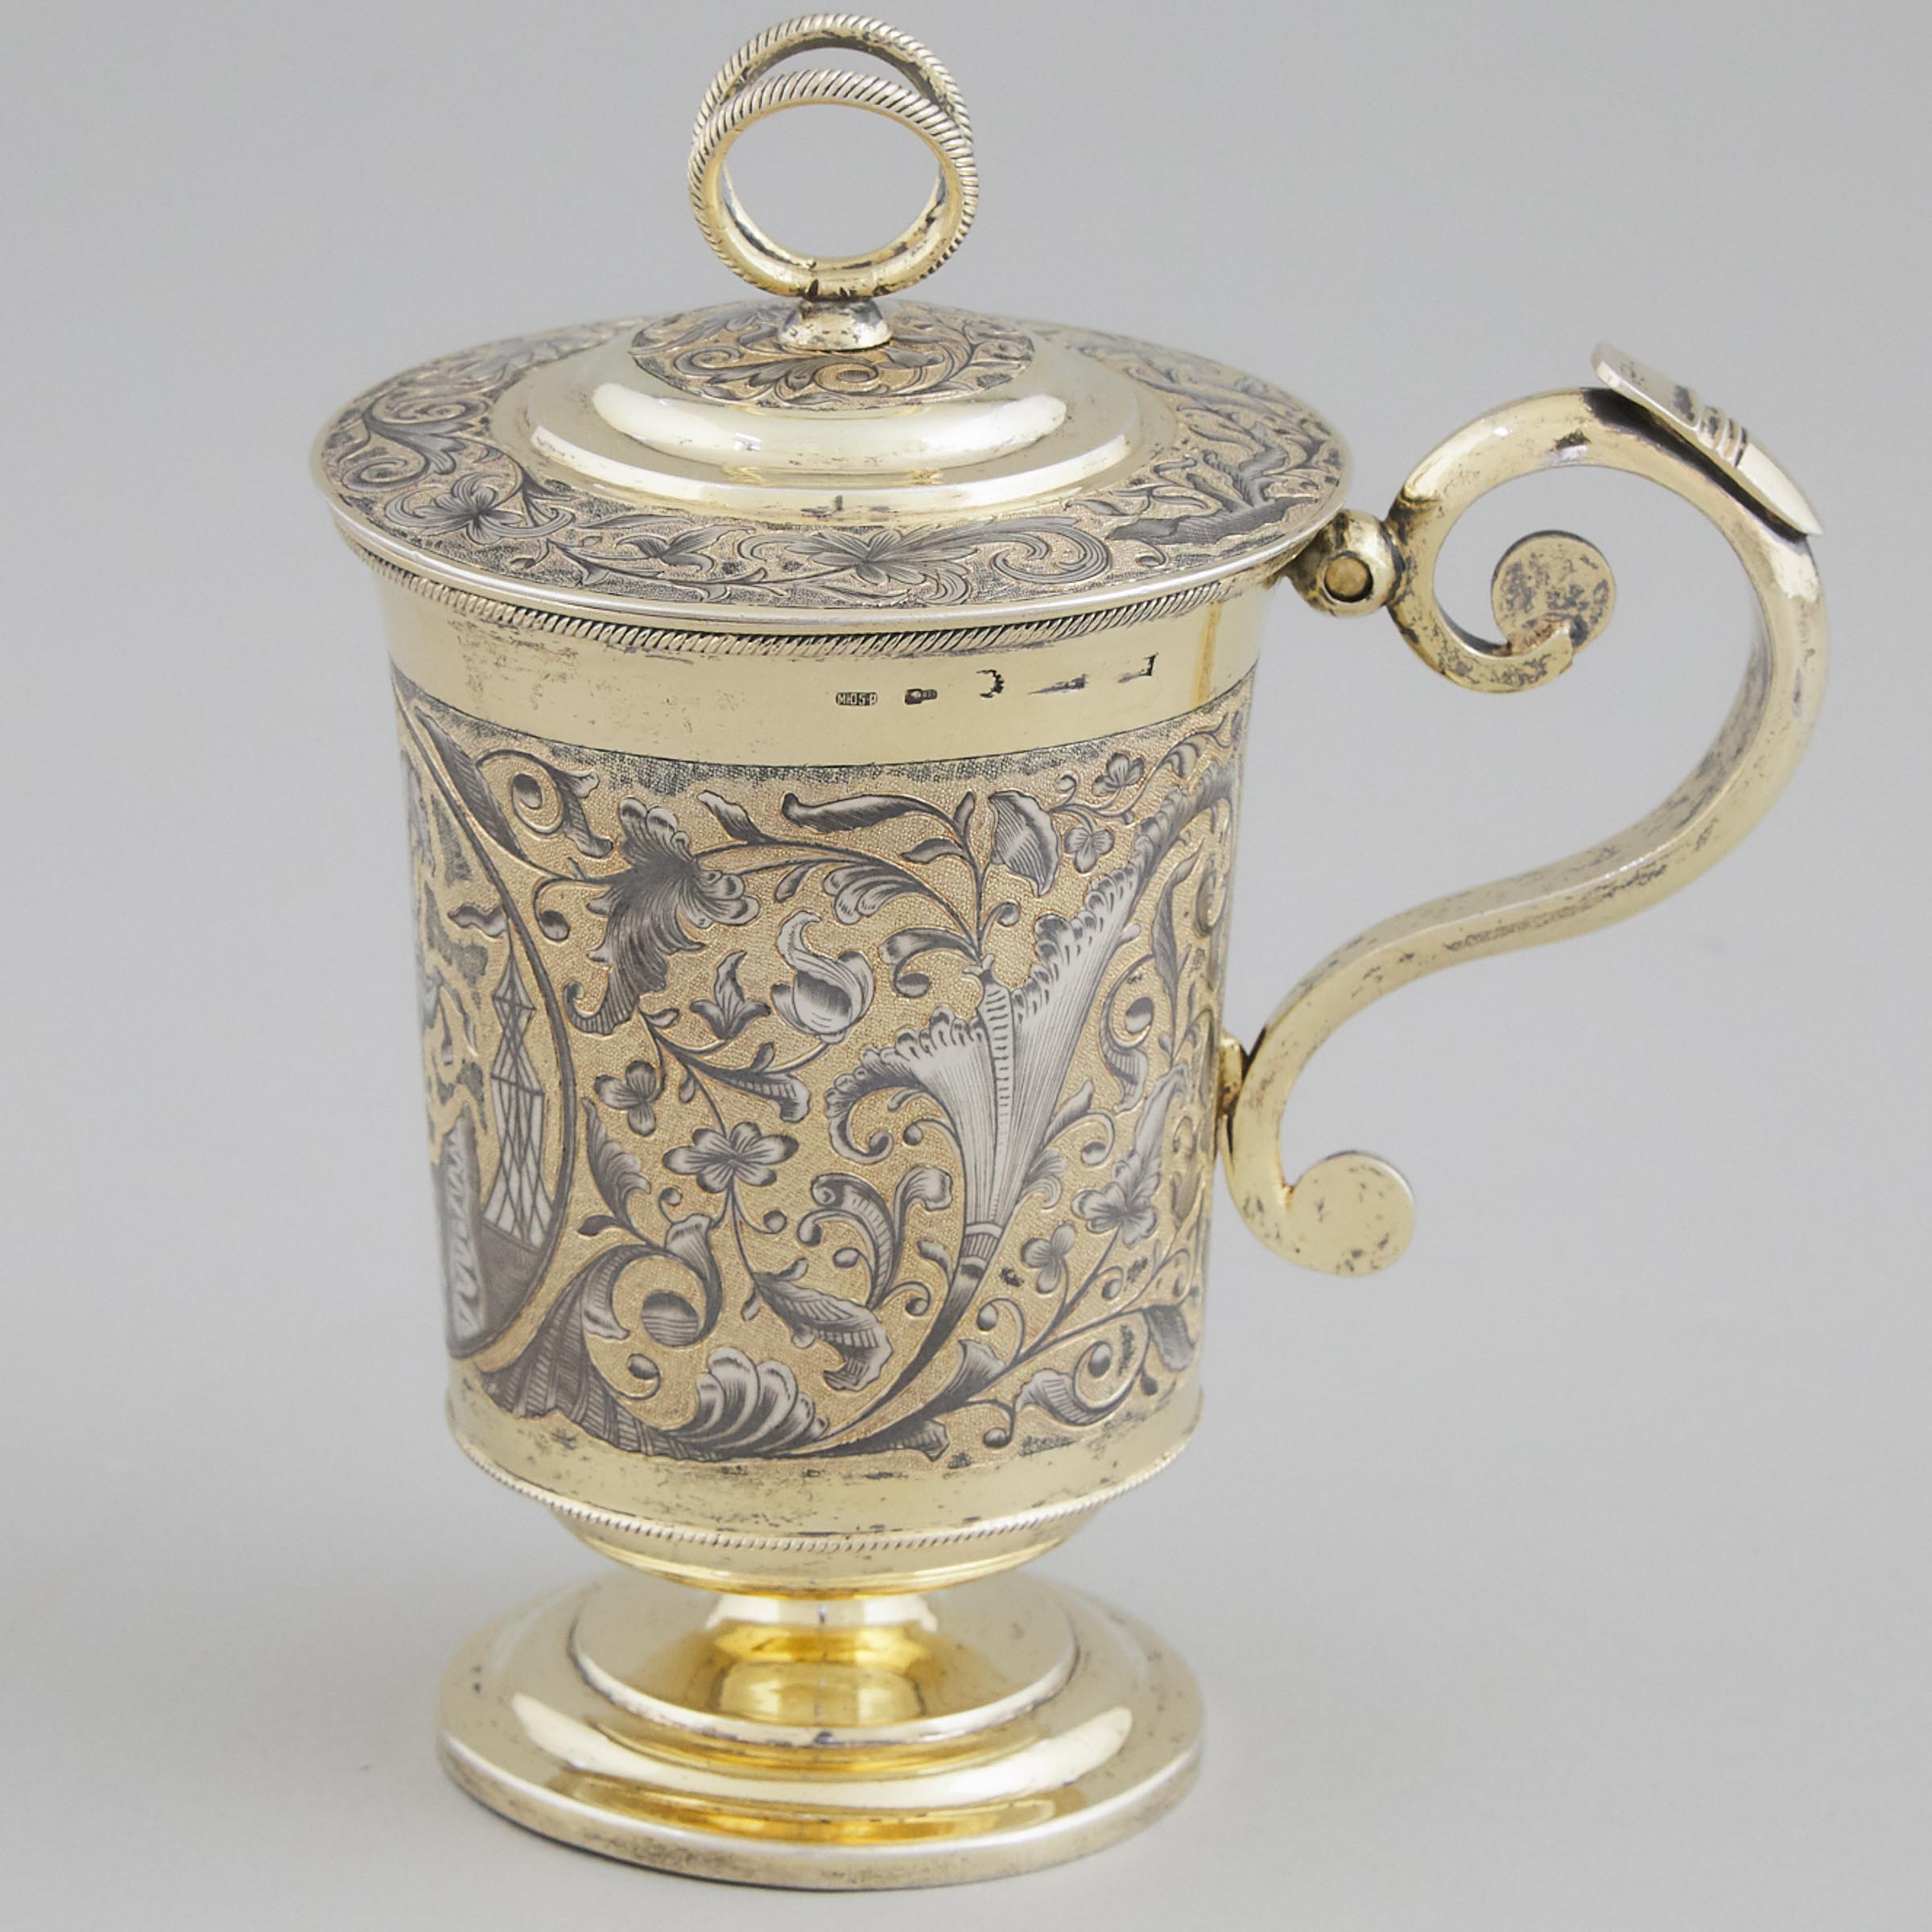 Russian Engraved and Nielloed Silver-Gilt Traveling Covered Cup, Moscow, 1840